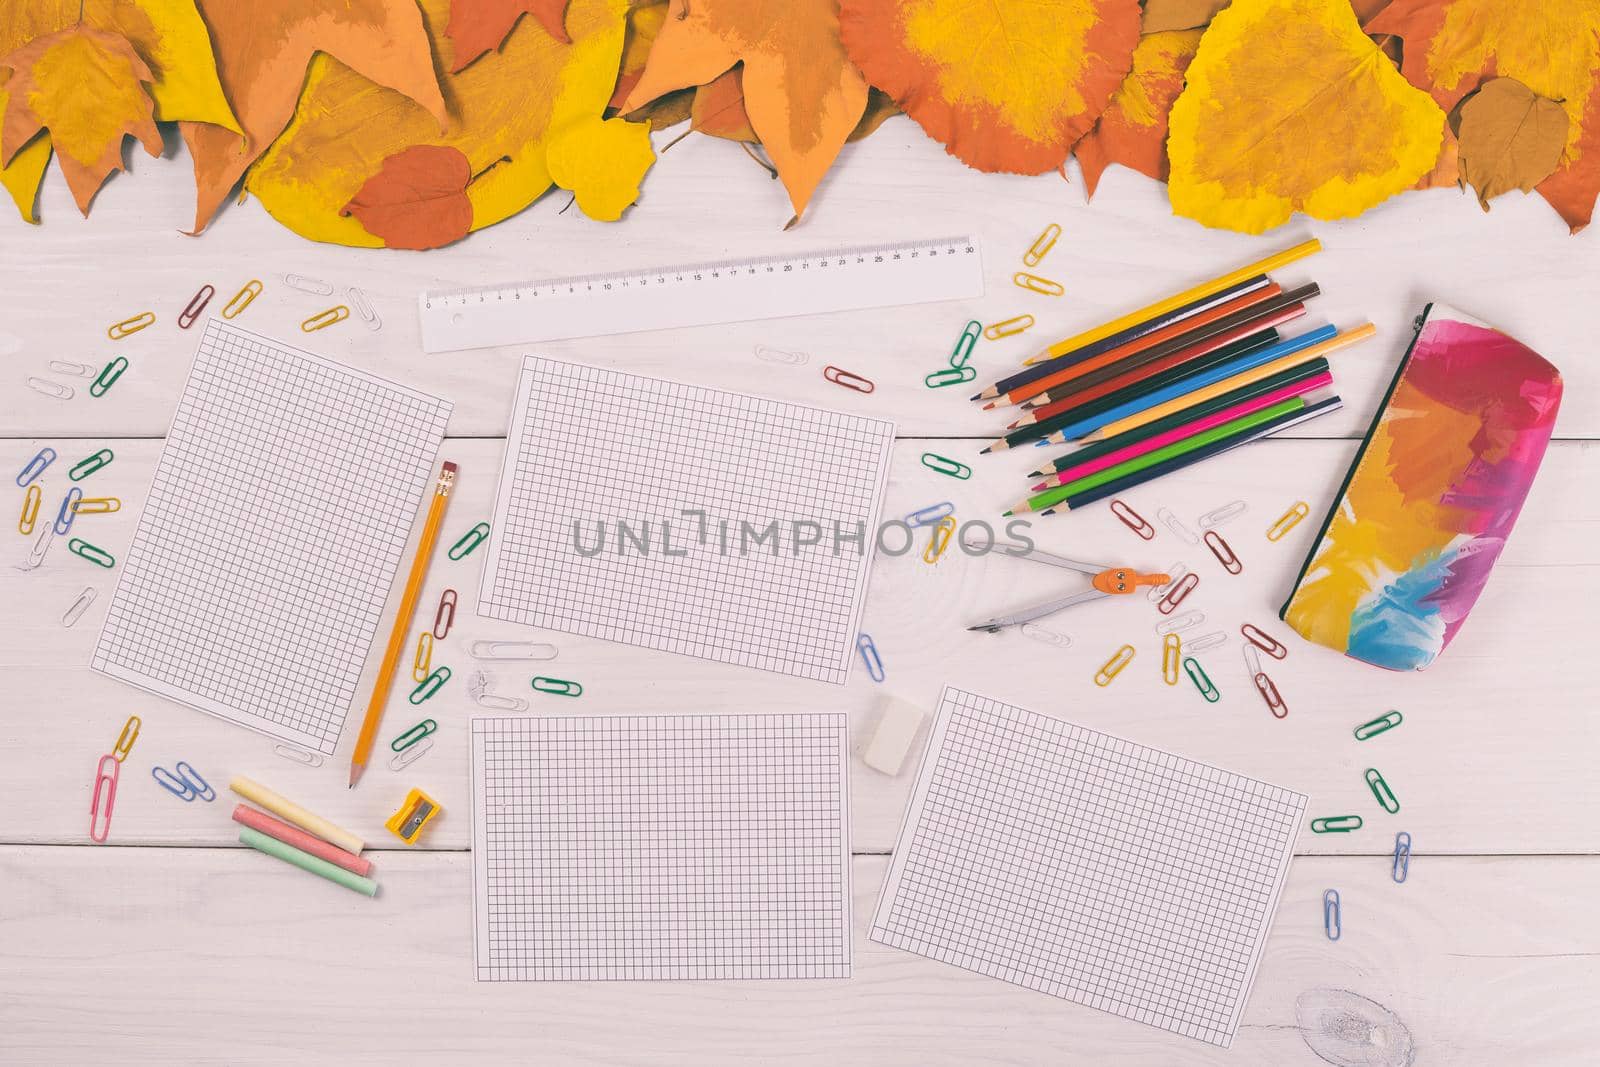 Empty white papers and school supplies on wooden table with painted leaves.Toned image.